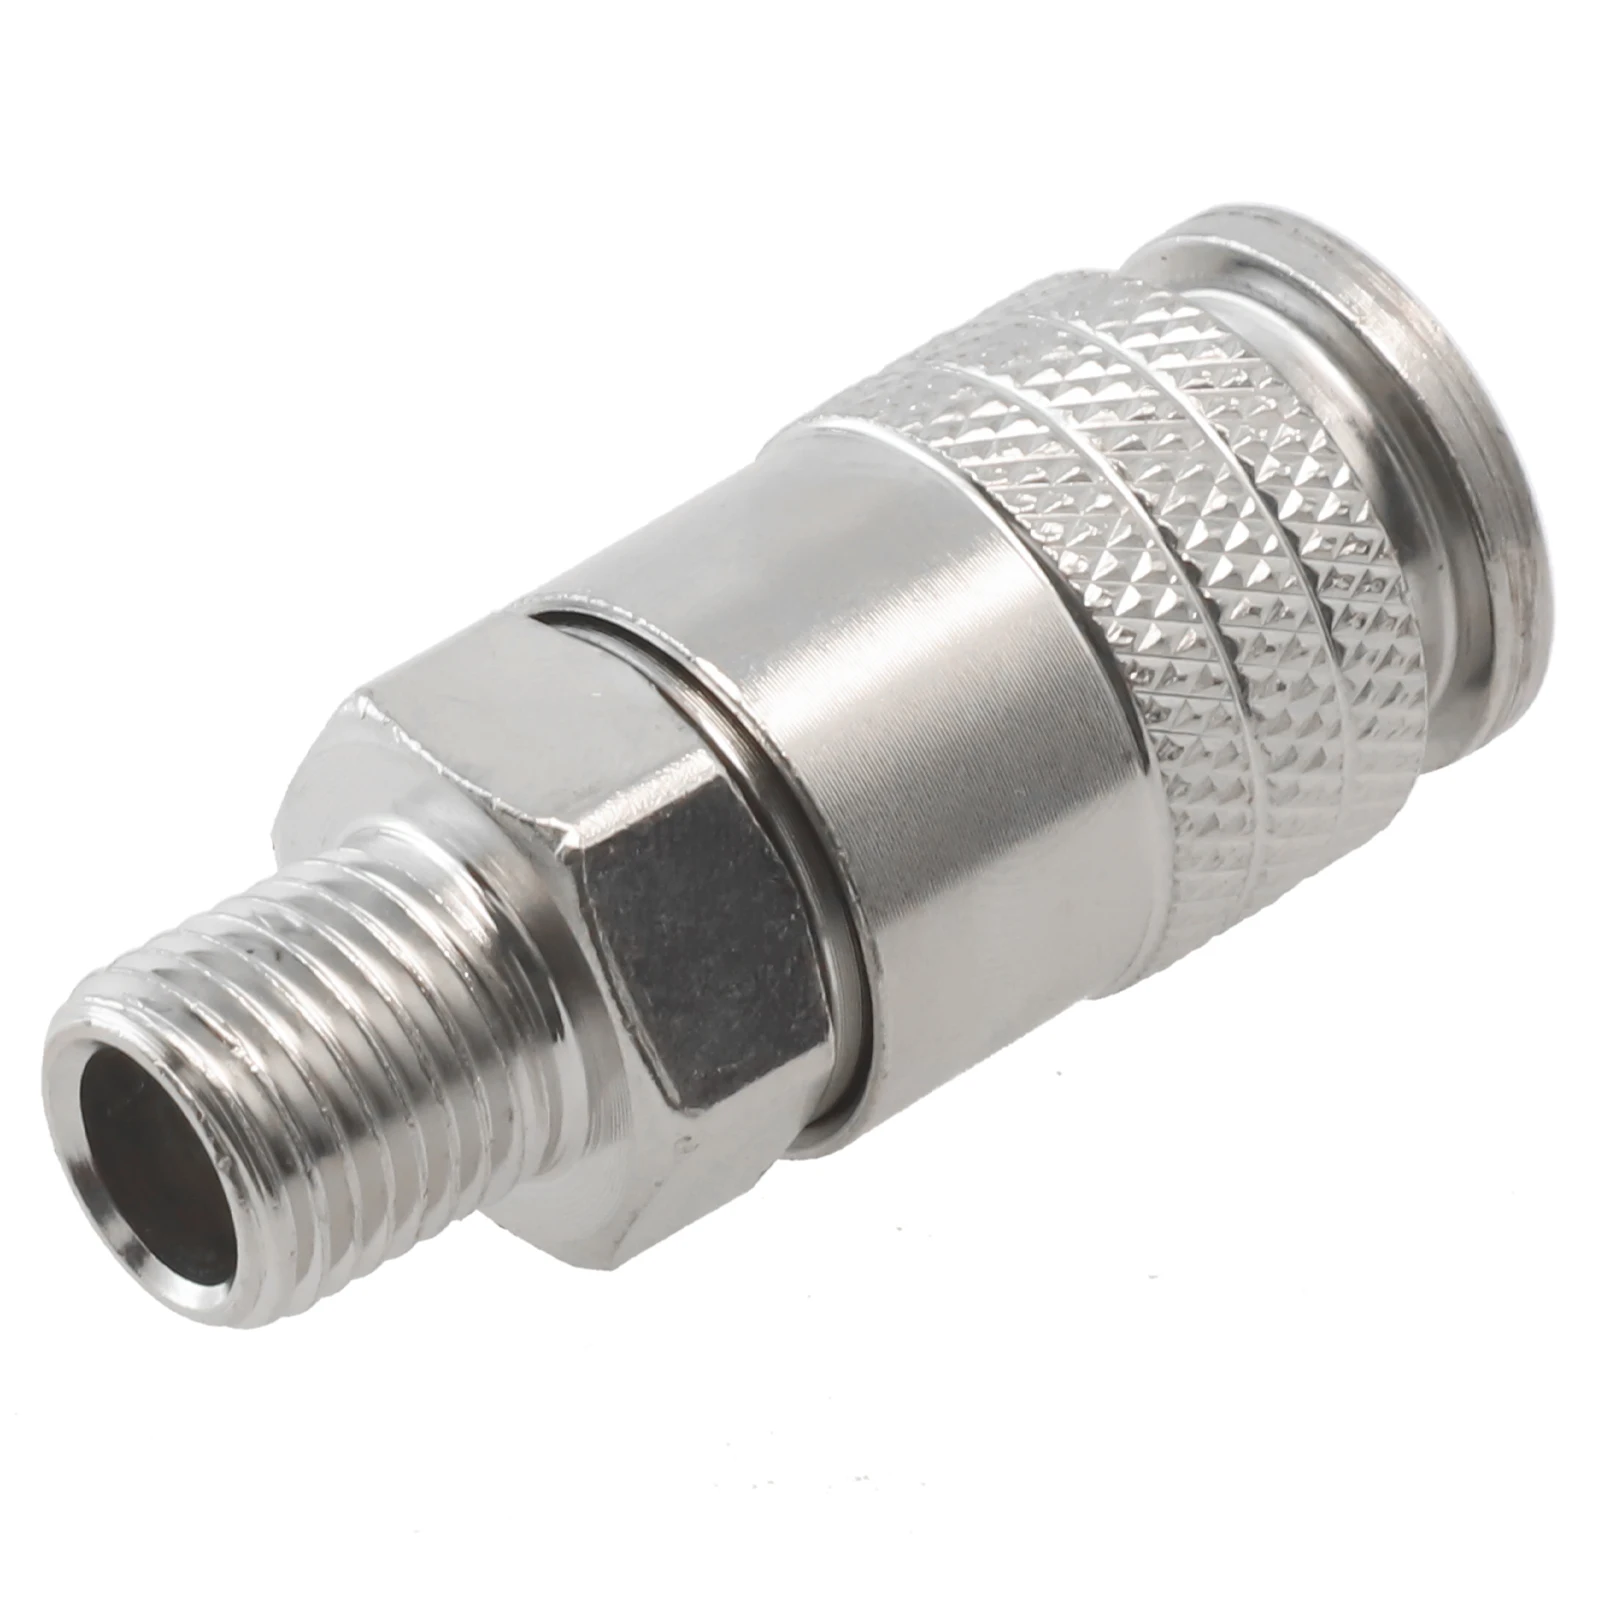 Pneumatic Fitting G1/4 Male Thread EU Standard Quick Connector For Air Compressor 53mm Length Air Compressor Tool Parts 350mm length extension connecting rod of diamond wet core drill male 1 1 4 7 unc to femal 1 1 4 7 unc thread